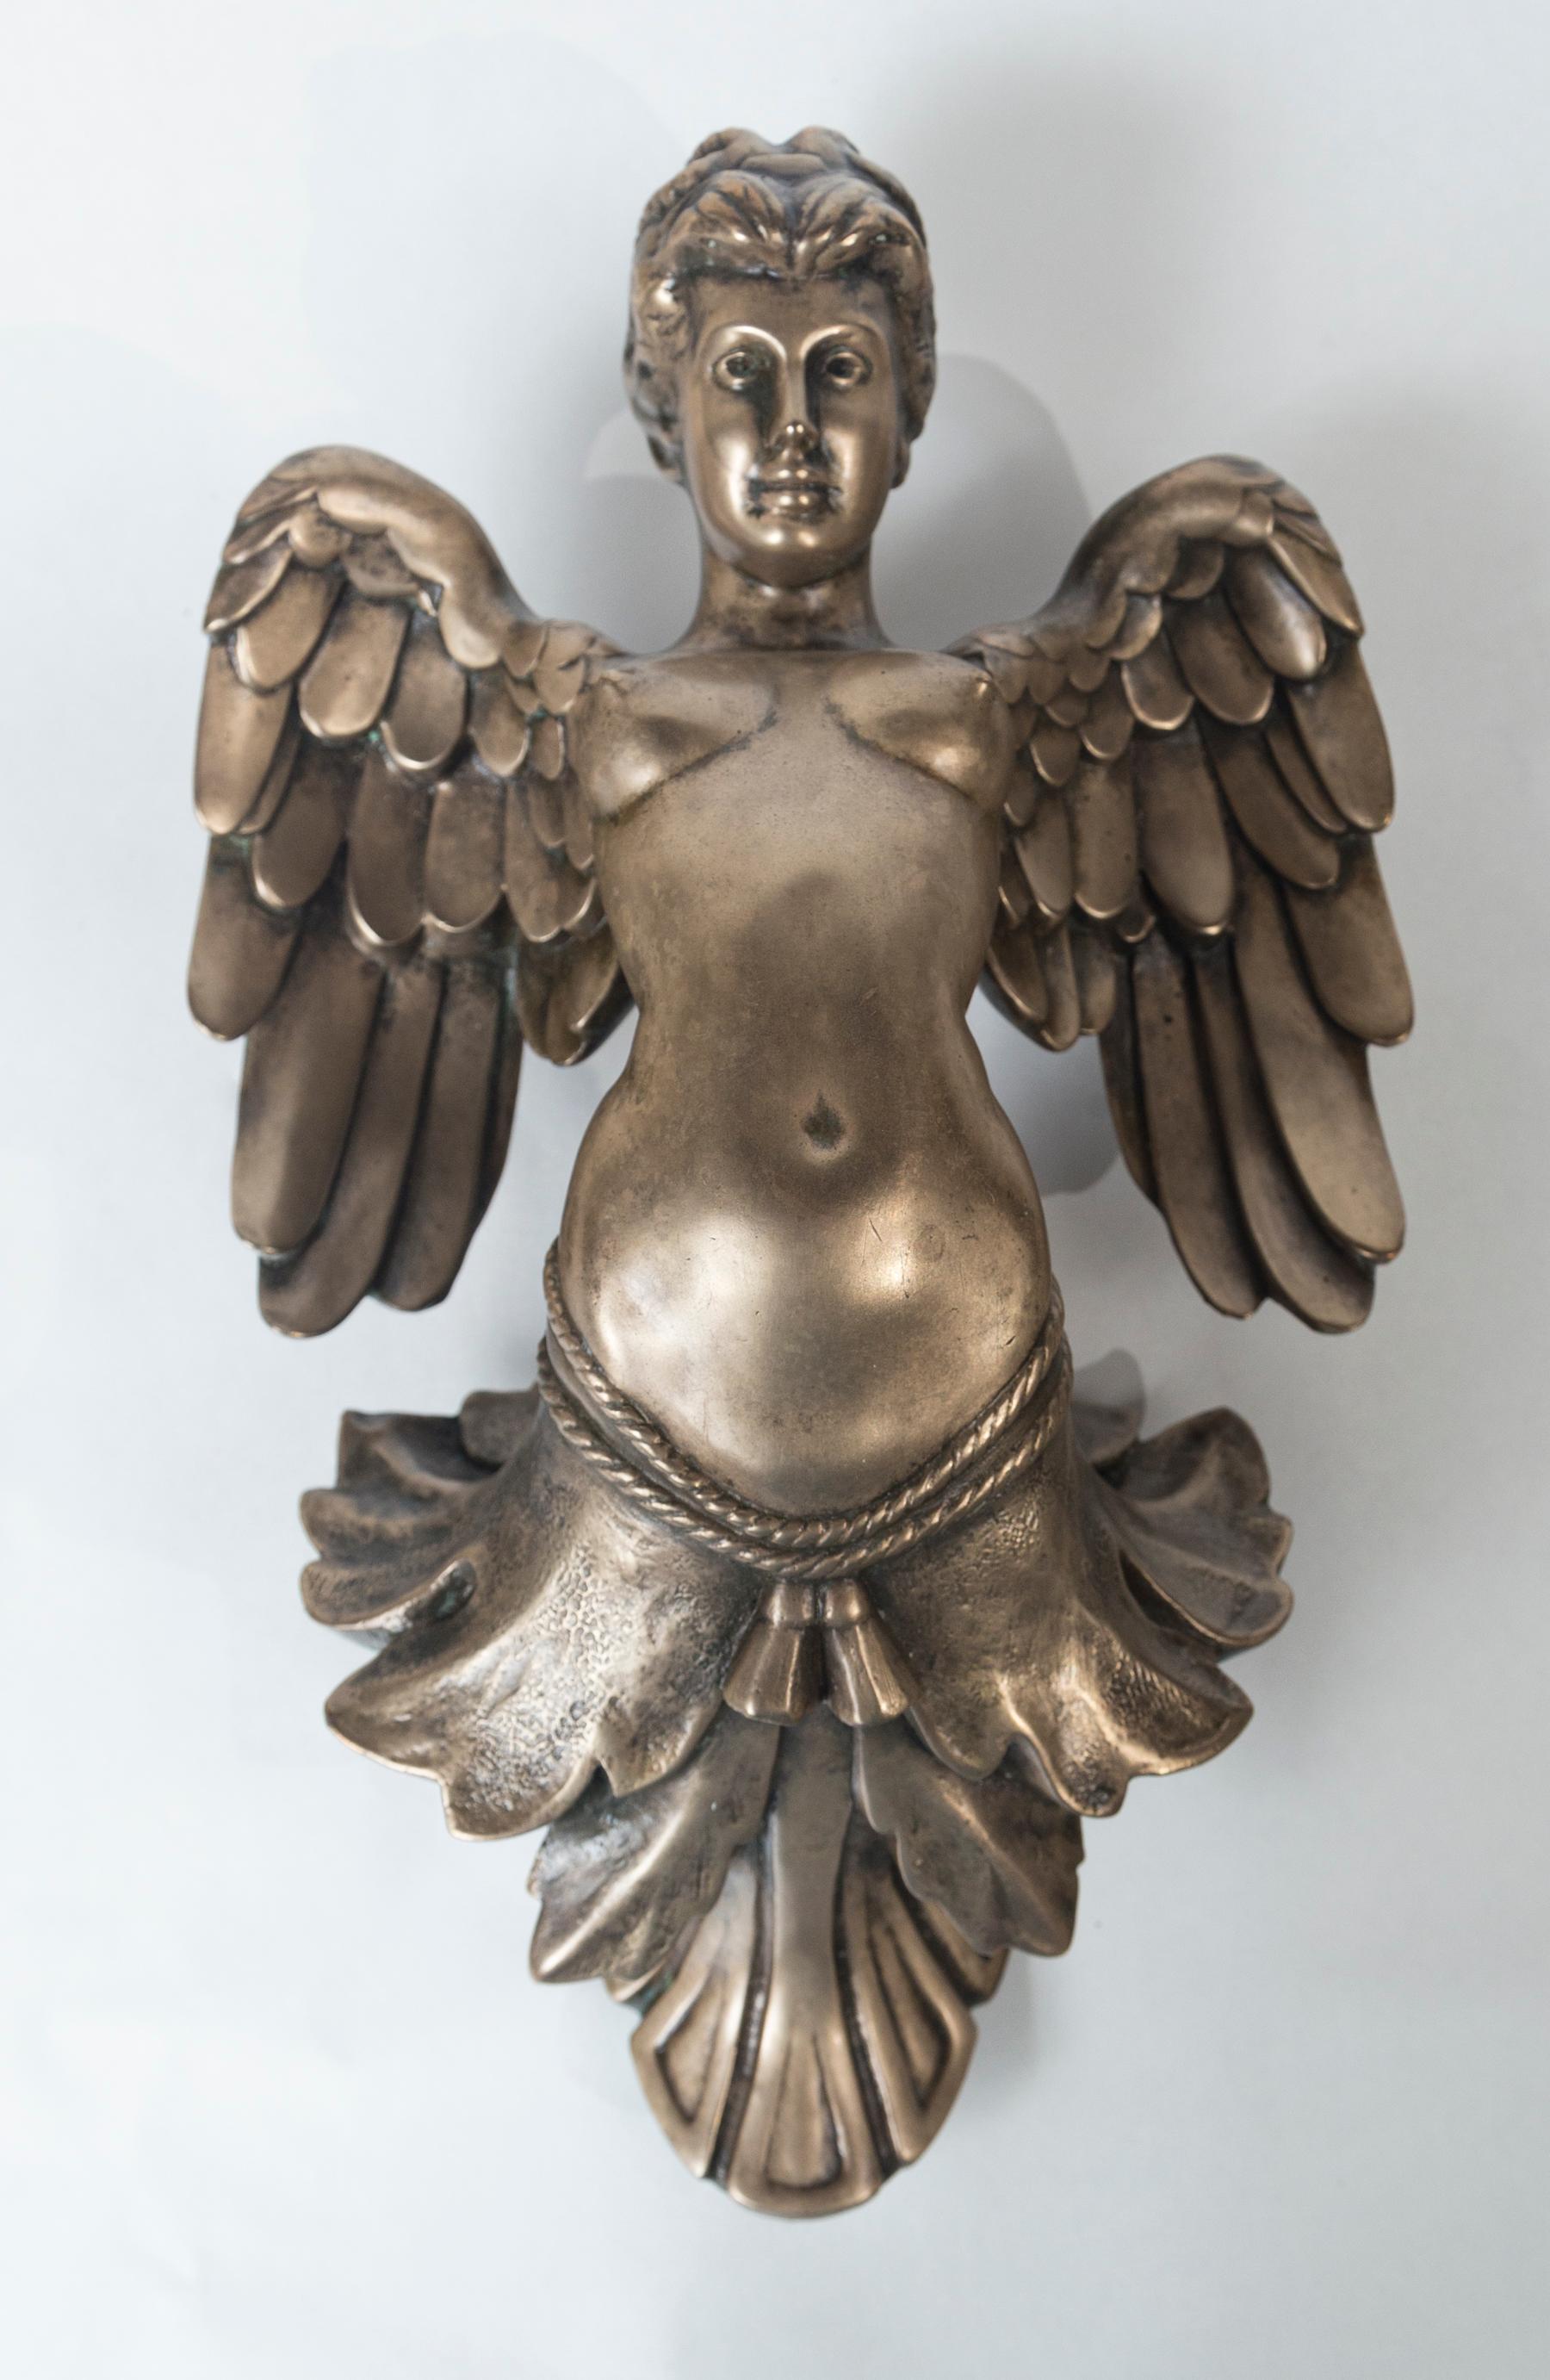 This female form, with wings, may have been part of a door knocker. It is signed on the back of the left wing MARK MILLER 1964, with a copyright circle and C and the letters AP. Polished surface.
The item has 3 bolts that would have secured it to